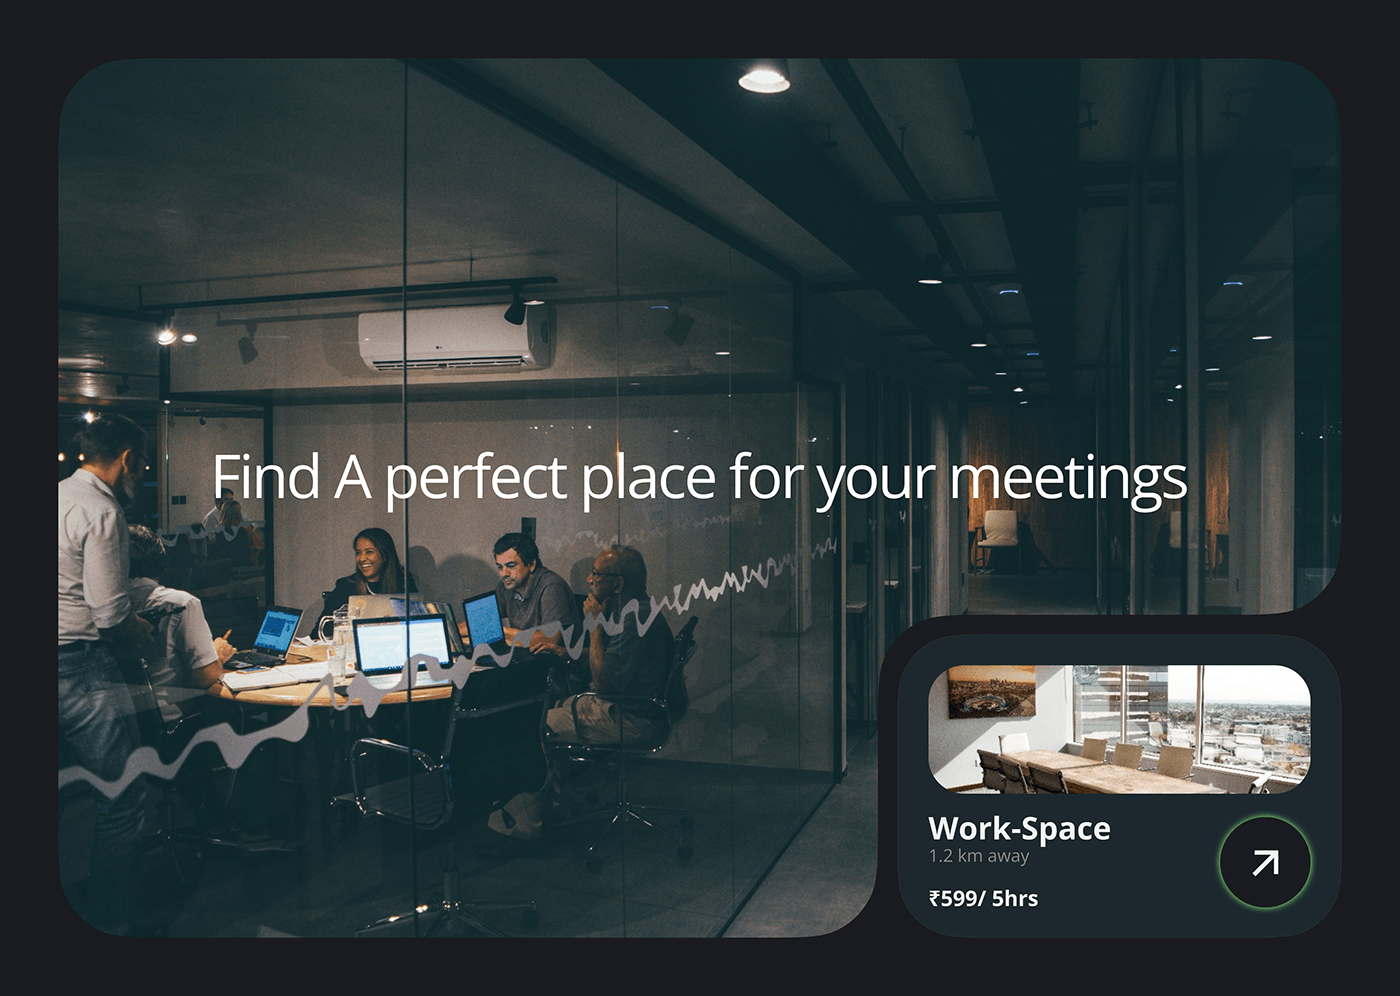 Find Co-working space online